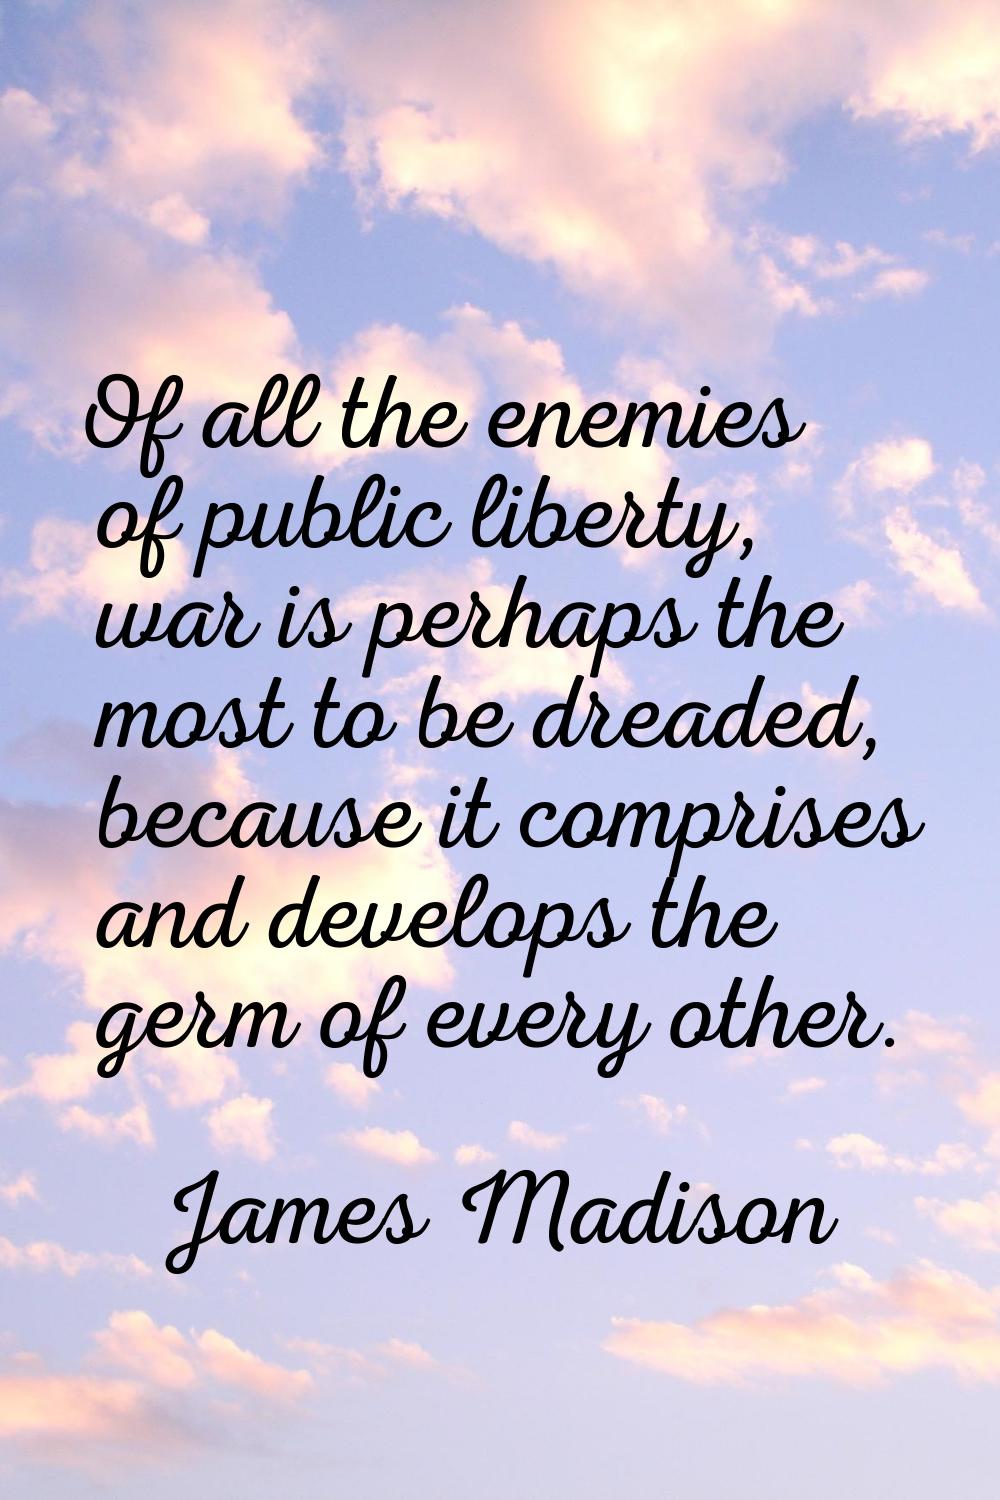 Of all the enemies of public liberty, war is perhaps the most to be dreaded, because it comprises a